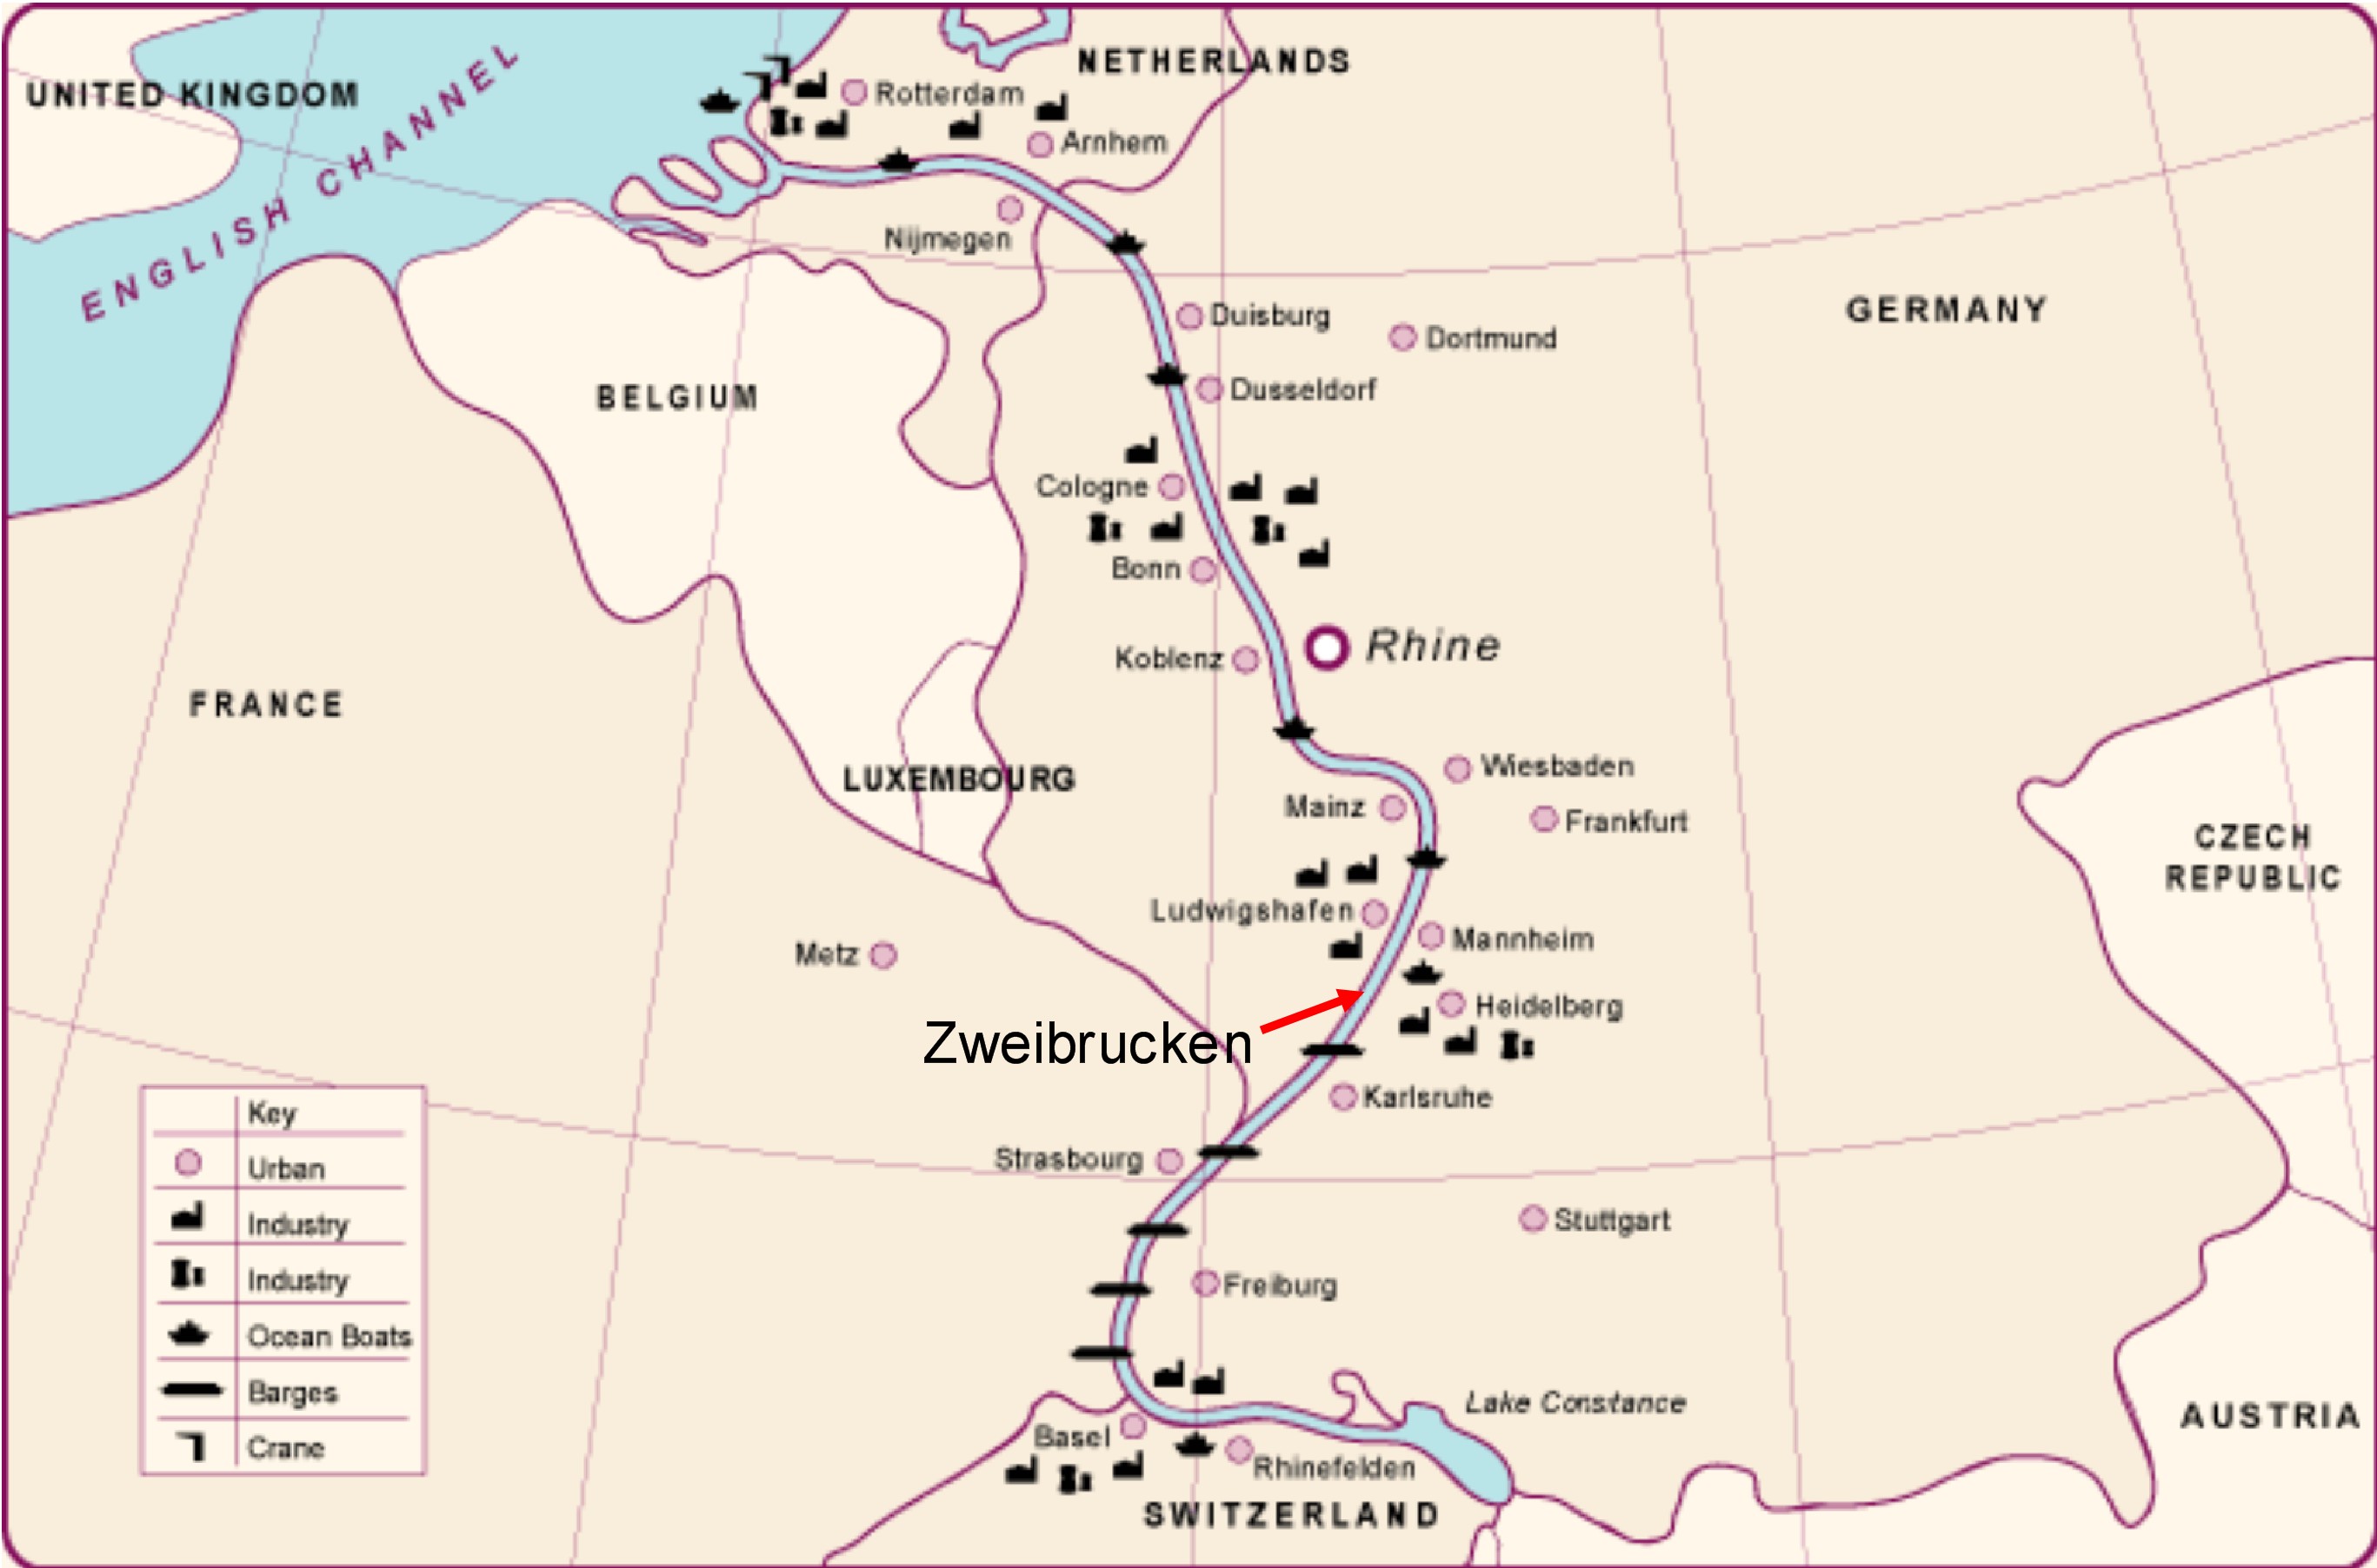 Route following the Rhine River